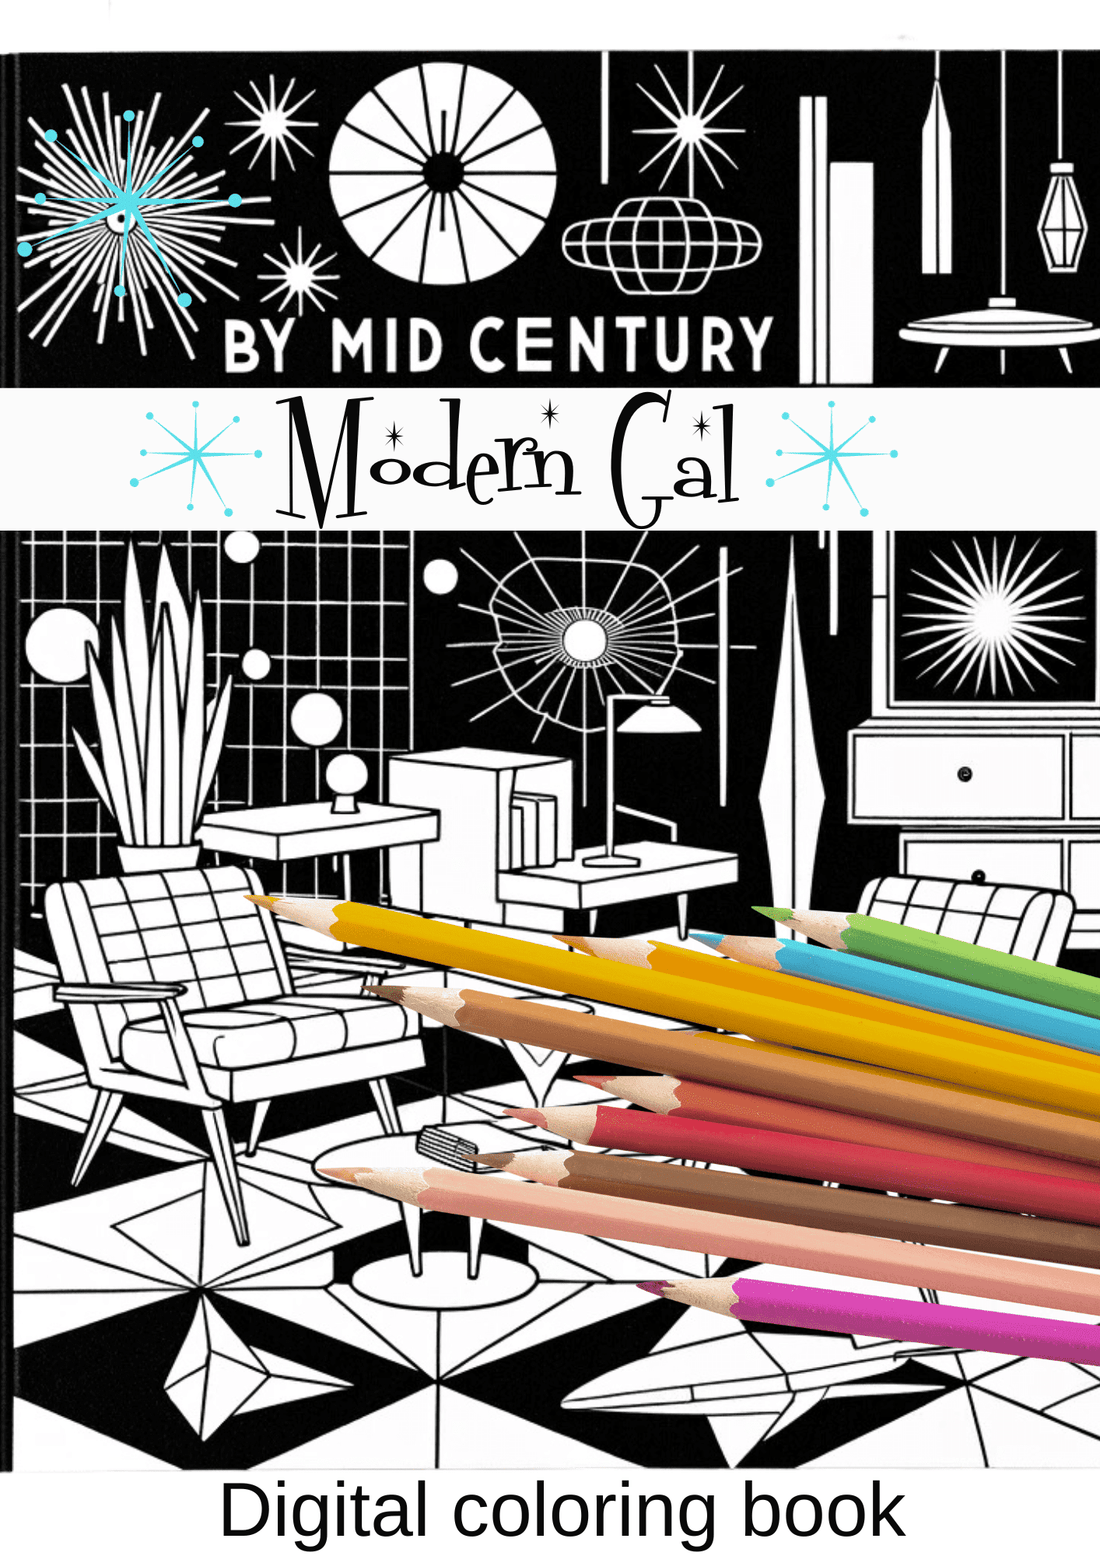 Mid Century Modern Digital Coloring Book Boasting With Modness 8x11